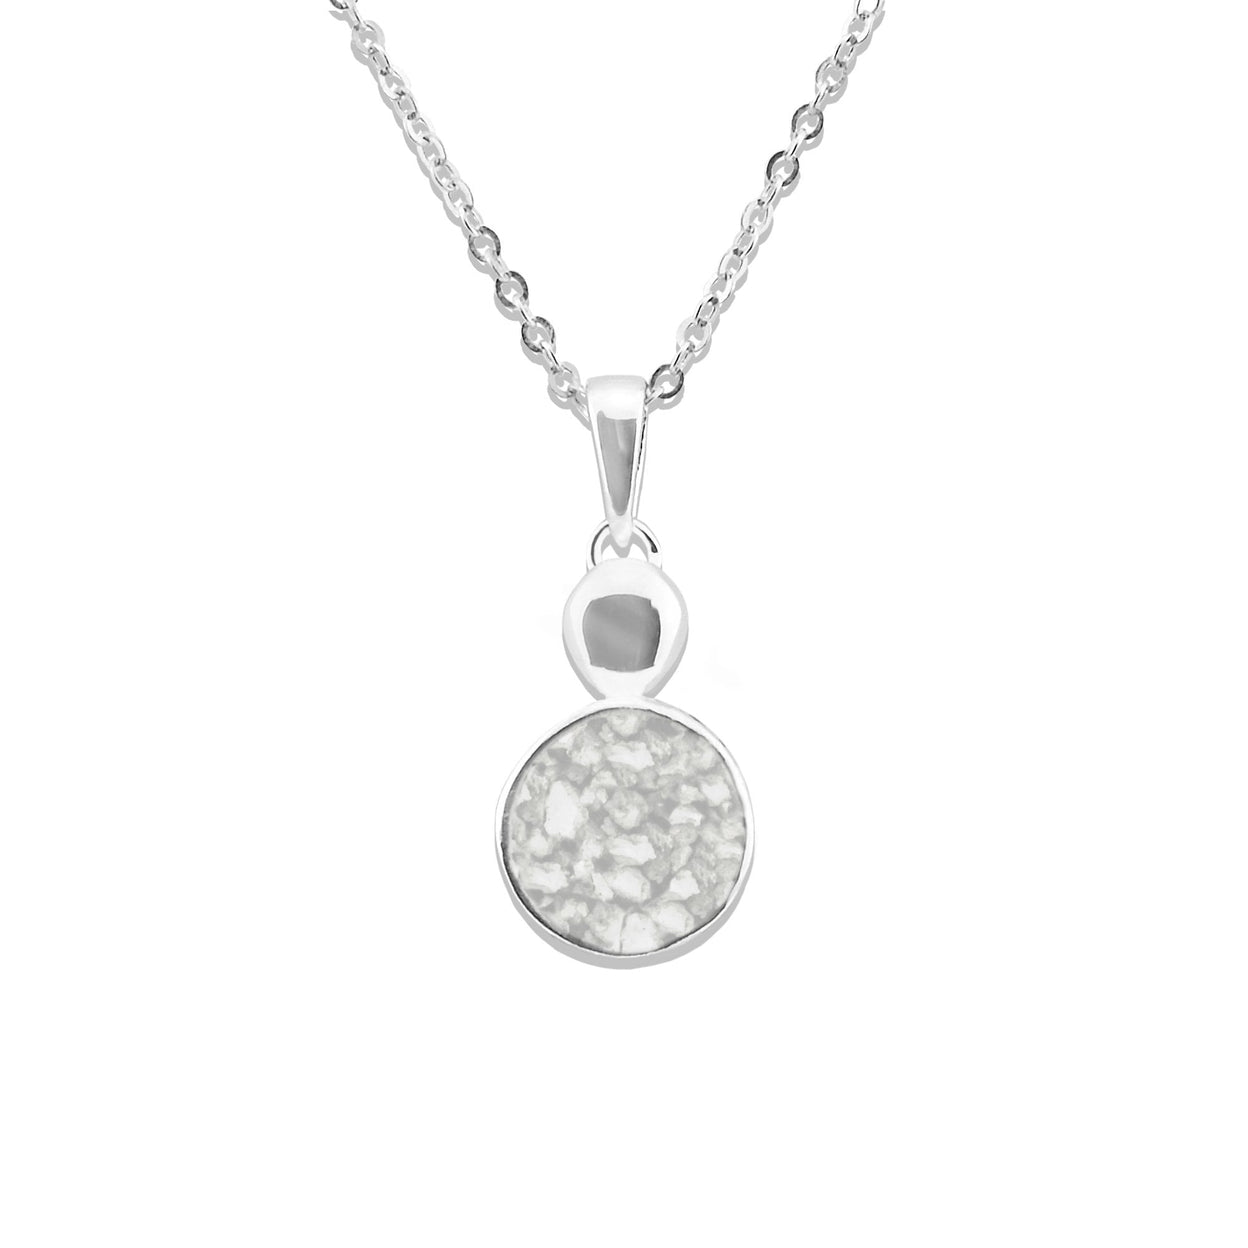 Load image into Gallery viewer, EverWith Ladies Delicate Drop Memorial Ashes Pendant - EverWith Memorial Jewellery - Trade